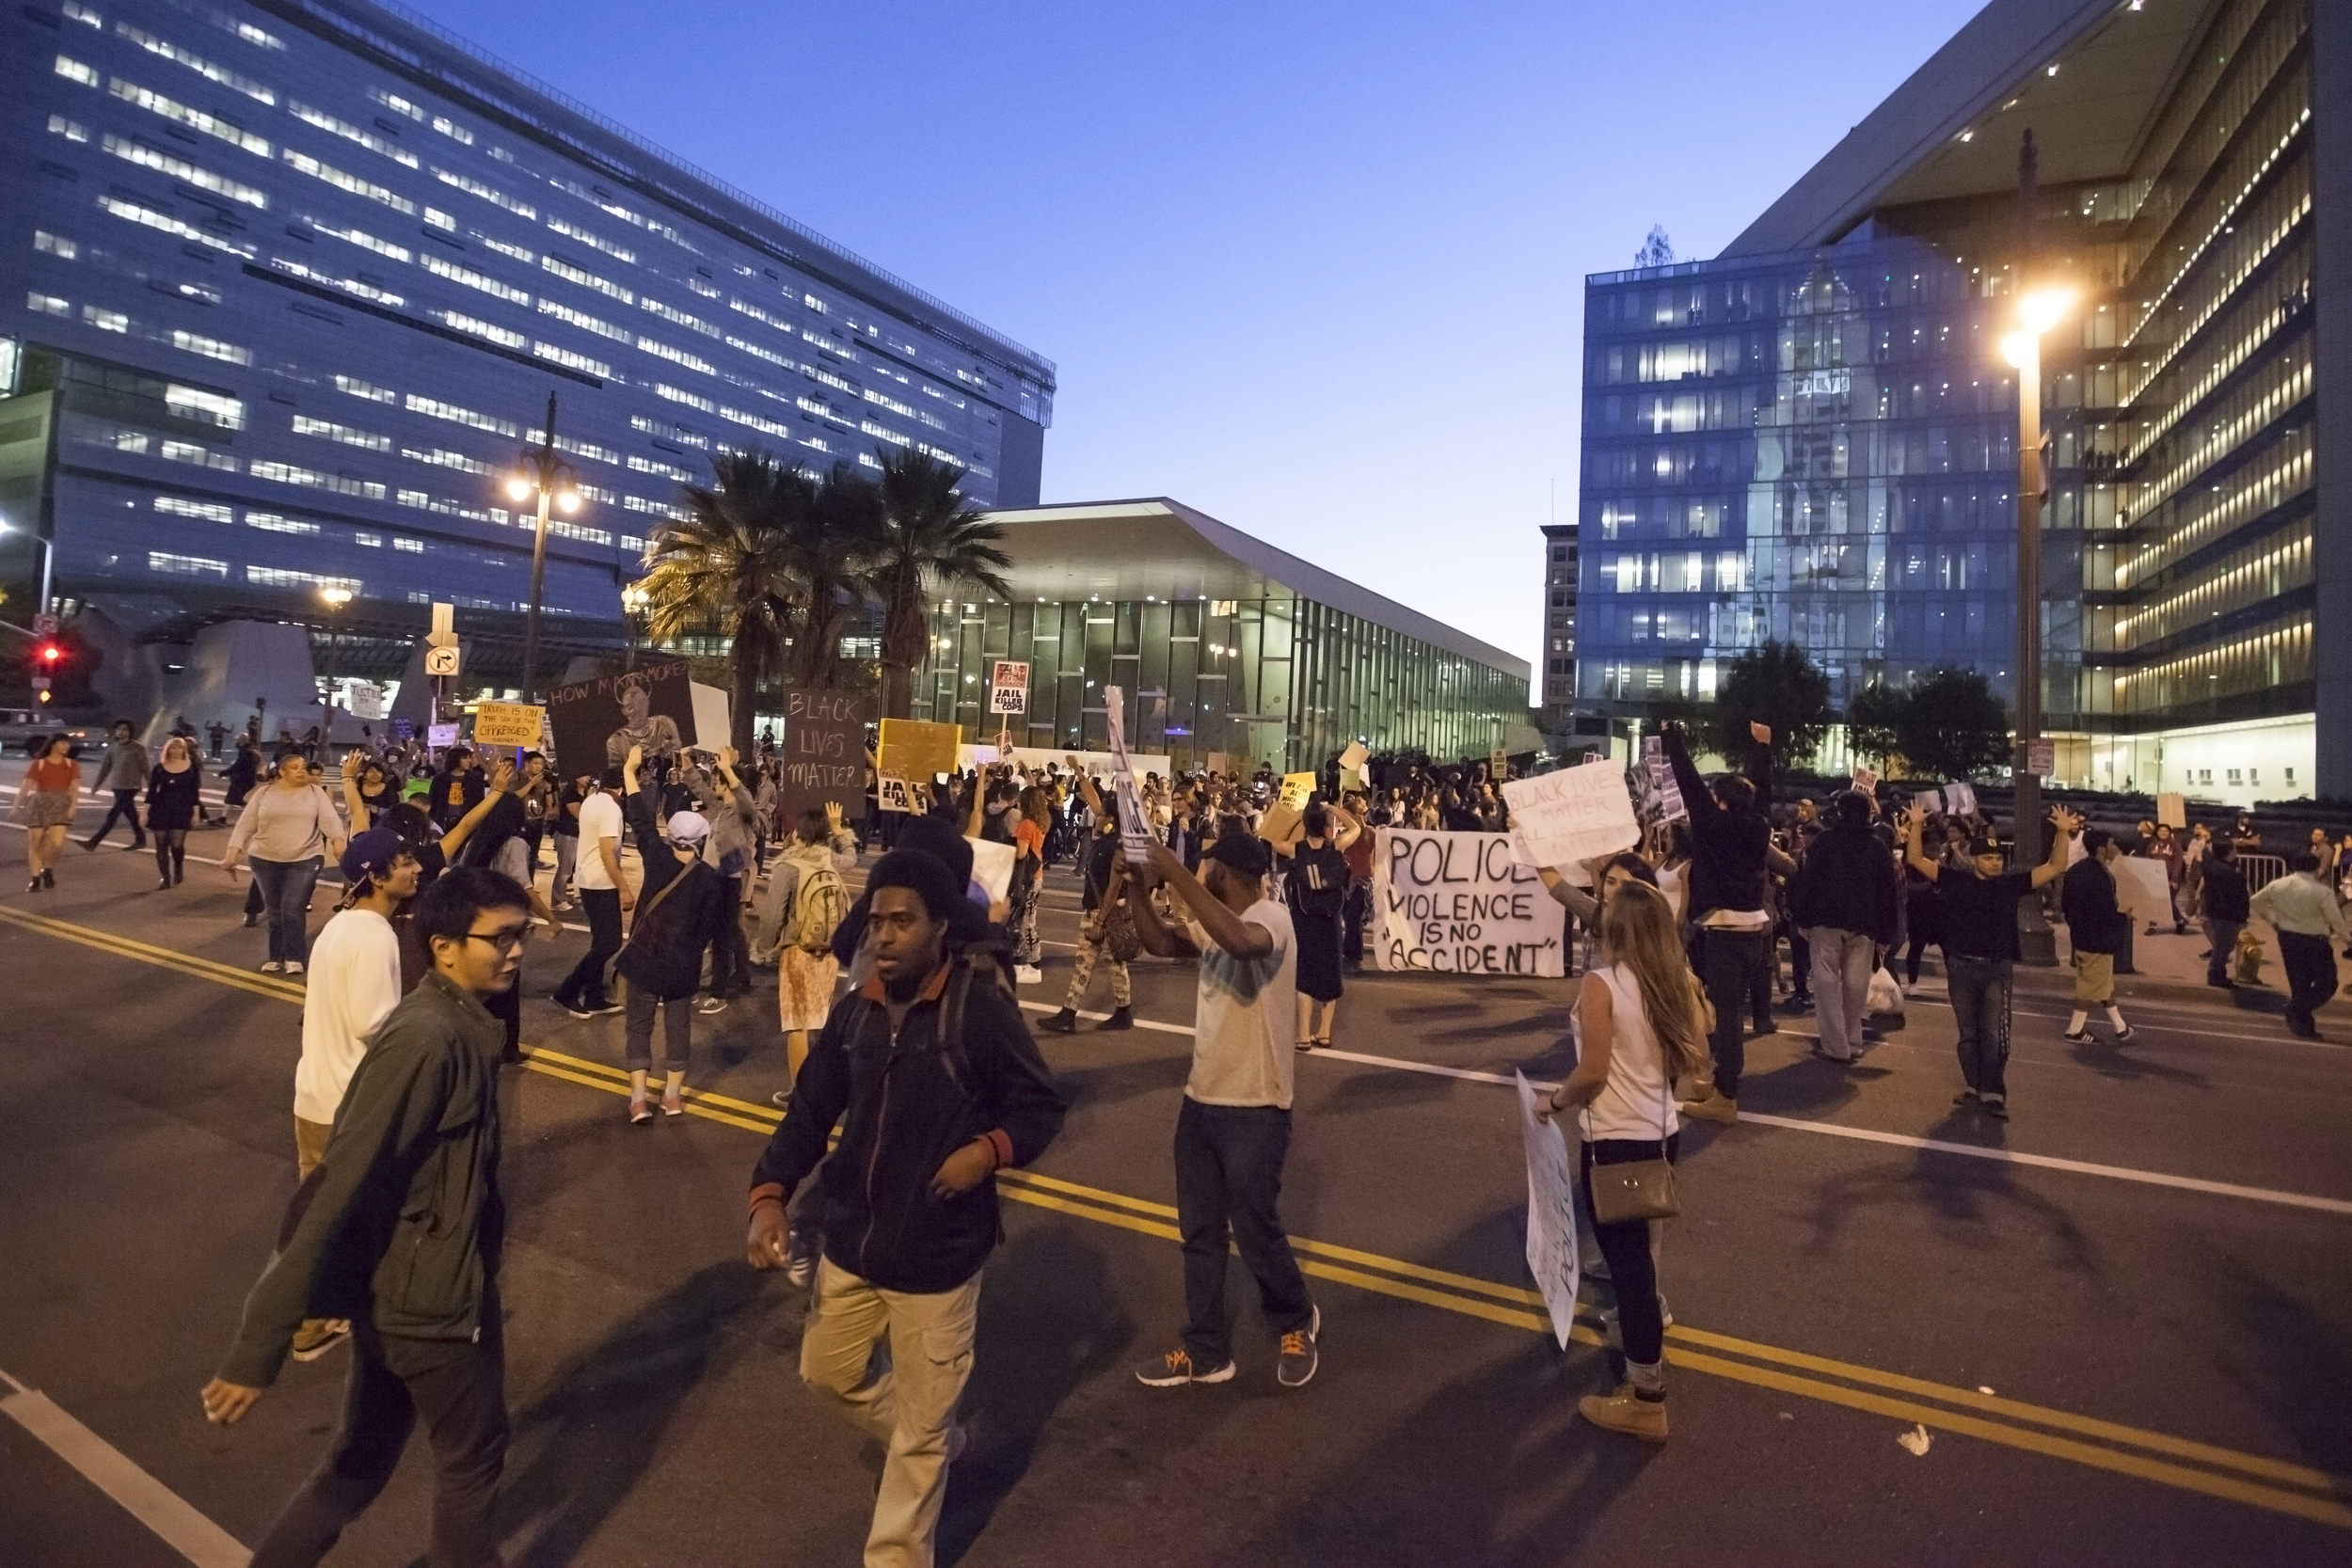  Protesters march in front of LAPD headquarters during a rally in support for Mike Brown on Wednesday Nov. 26, 2014. Mike Brown was shot in Ferguson, Miss. by officer Darren Wilson after a confrontation between the two. Brown's death and officer Wils